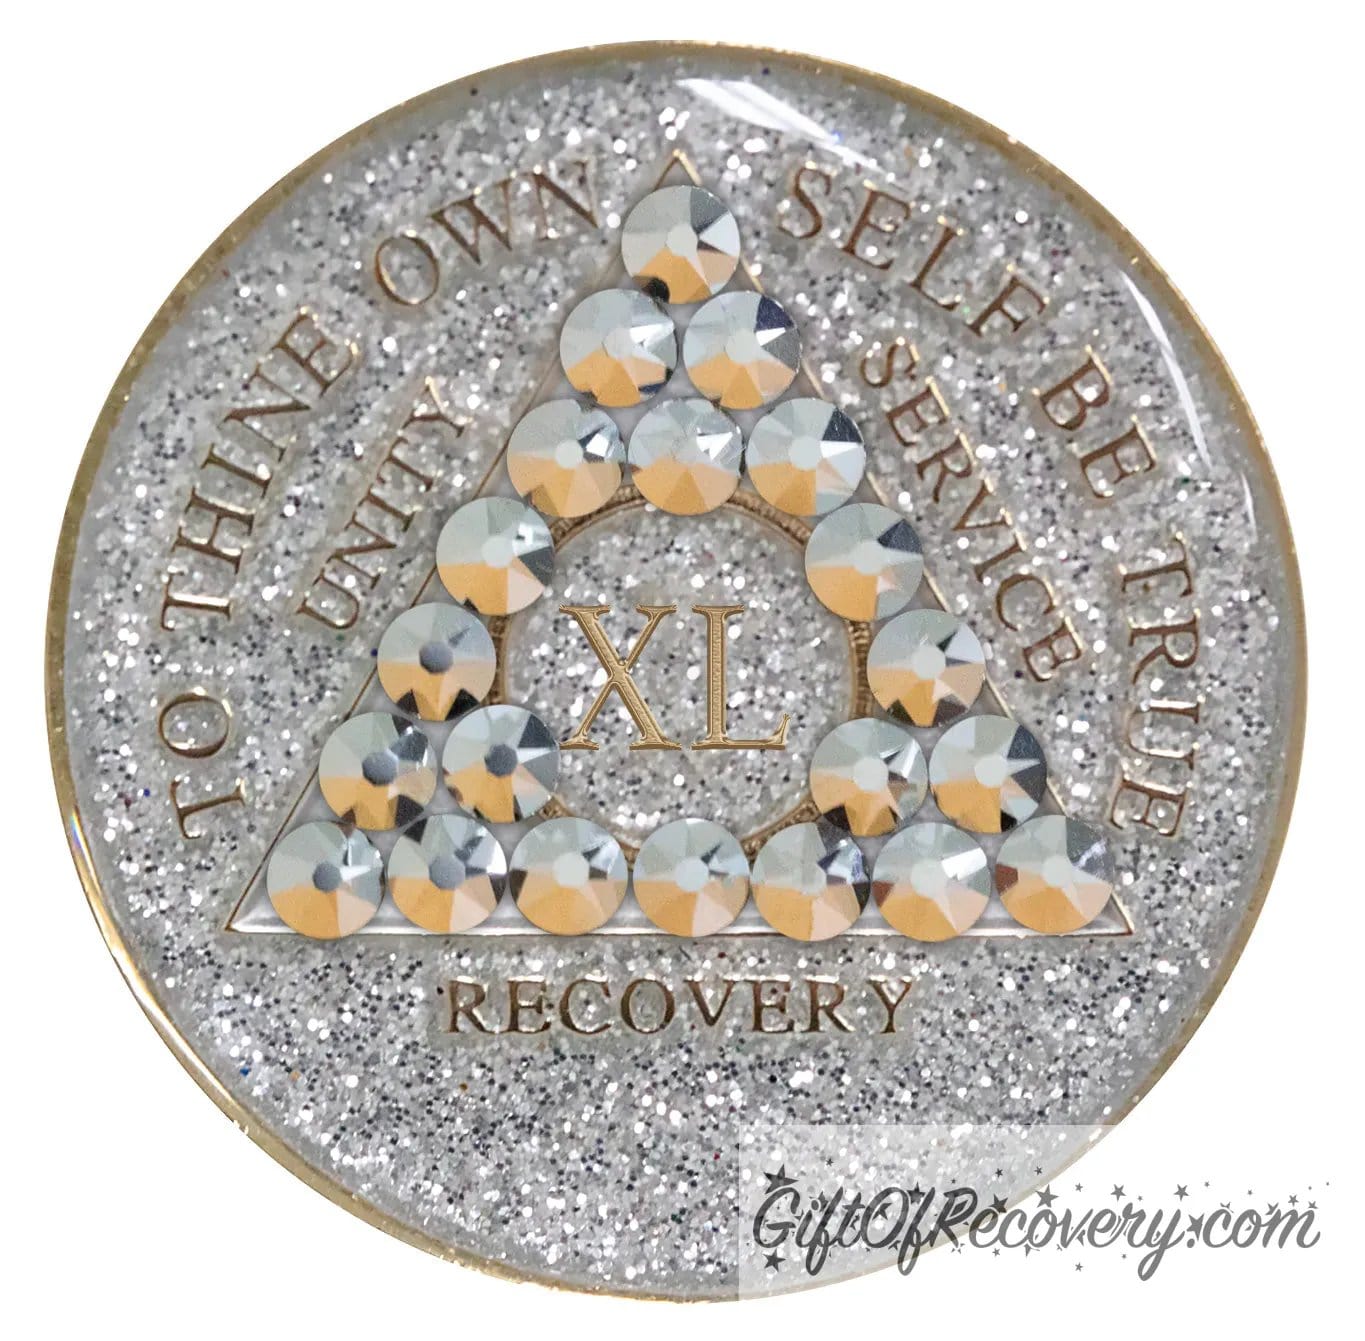 40 year silver glitter AA medallion with 21 genuine comet crystals, forming a triangle around the 1 year, while the year, unity, service, recovery, rim, and To Thine Own Self Be True are embossed in 14k gold, sealed with resin to give it a glossy finish, hand painted and scratch resistant.